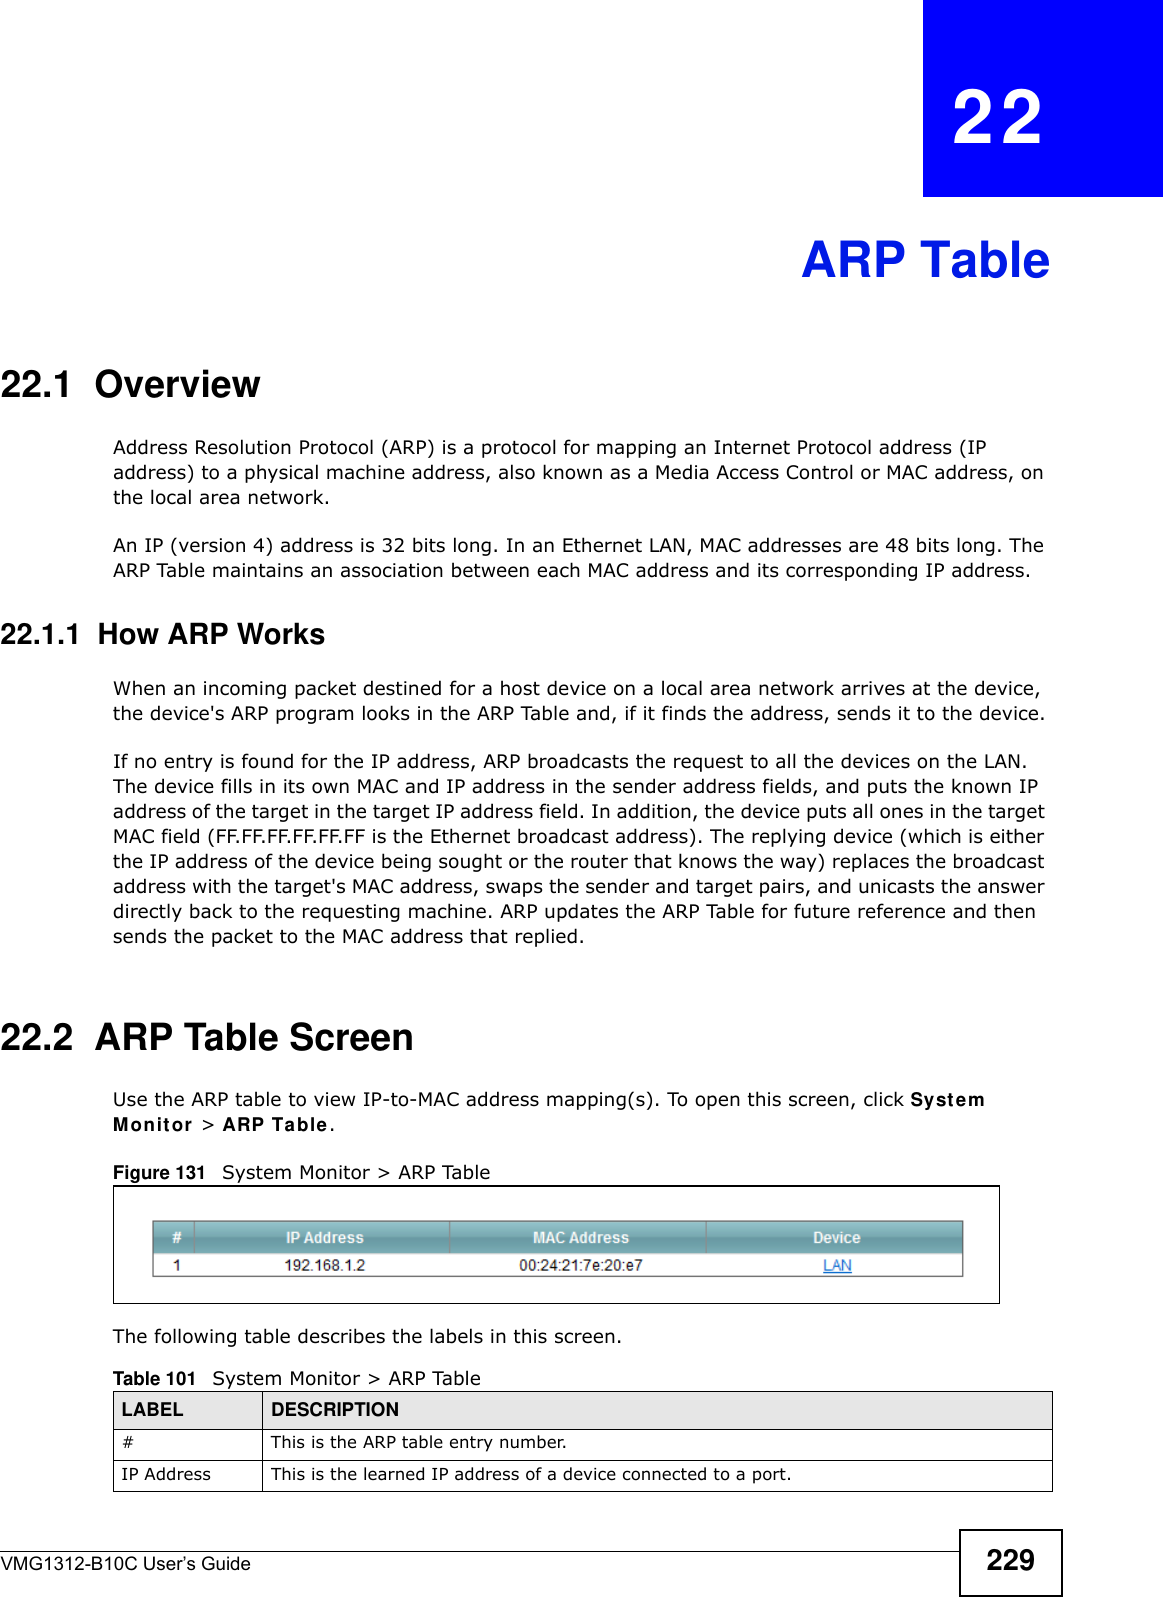 VMG1312-B10C User’s Guide 229CHAPTER   22ARP Table22.1  OverviewAddress Resolution Protocol (ARP) is a protocol for mapping an Internet Protocol address (IP address) to a physical machine address, also known as a Media Access Control or MAC address, on the local area network. An IP (version 4) address is 32 bits long. In an Ethernet LAN, MAC addresses are 48 bits long. The ARP Table maintains an association between each MAC address and its corresponding IP address. 22.1.1  How ARP WorksWhen an incoming packet destined for a host device on a local area network arrives at the device, the device&apos;s ARP program looks in the ARP Table and, if it finds the address, sends it to the device.If no entry is found for the IP address, ARP broadcasts the request to all the devices on the LAN. The device fills in its own MAC and IP address in the sender address fields, and puts the known IP address of the target in the target IP address field. In addition, the device puts all ones in the target MA C f i el d  ( F F.F F.F F. F F. FF. F F  i s t he  E th er n et  br o ad ca s t address). The replying device (which is either the IP address of the device being sought or the router that knows the way) replaces the broadcast address with the target&apos;s MAC address, swaps the sender and target pairs, and unicasts the answer directly back to the requesting machine. ARP updates the ARP Table for future reference and then sends the packet to the MAC address that replied. 22.2  ARP Table ScreenUse the ARP table to view IP-to-MAC address mapping(s). To open this screen, click Syst em  M on it or  &gt; ARP Table.Figure 131   System Monitor &gt; ARP TableThe following table describes the labels in this screen.Table 101   System Monitor &gt; ARP TableLABEL DESCRIPTION# This is the ARP table entry number.IP Address This is the learned IP address of a device connected to a port.